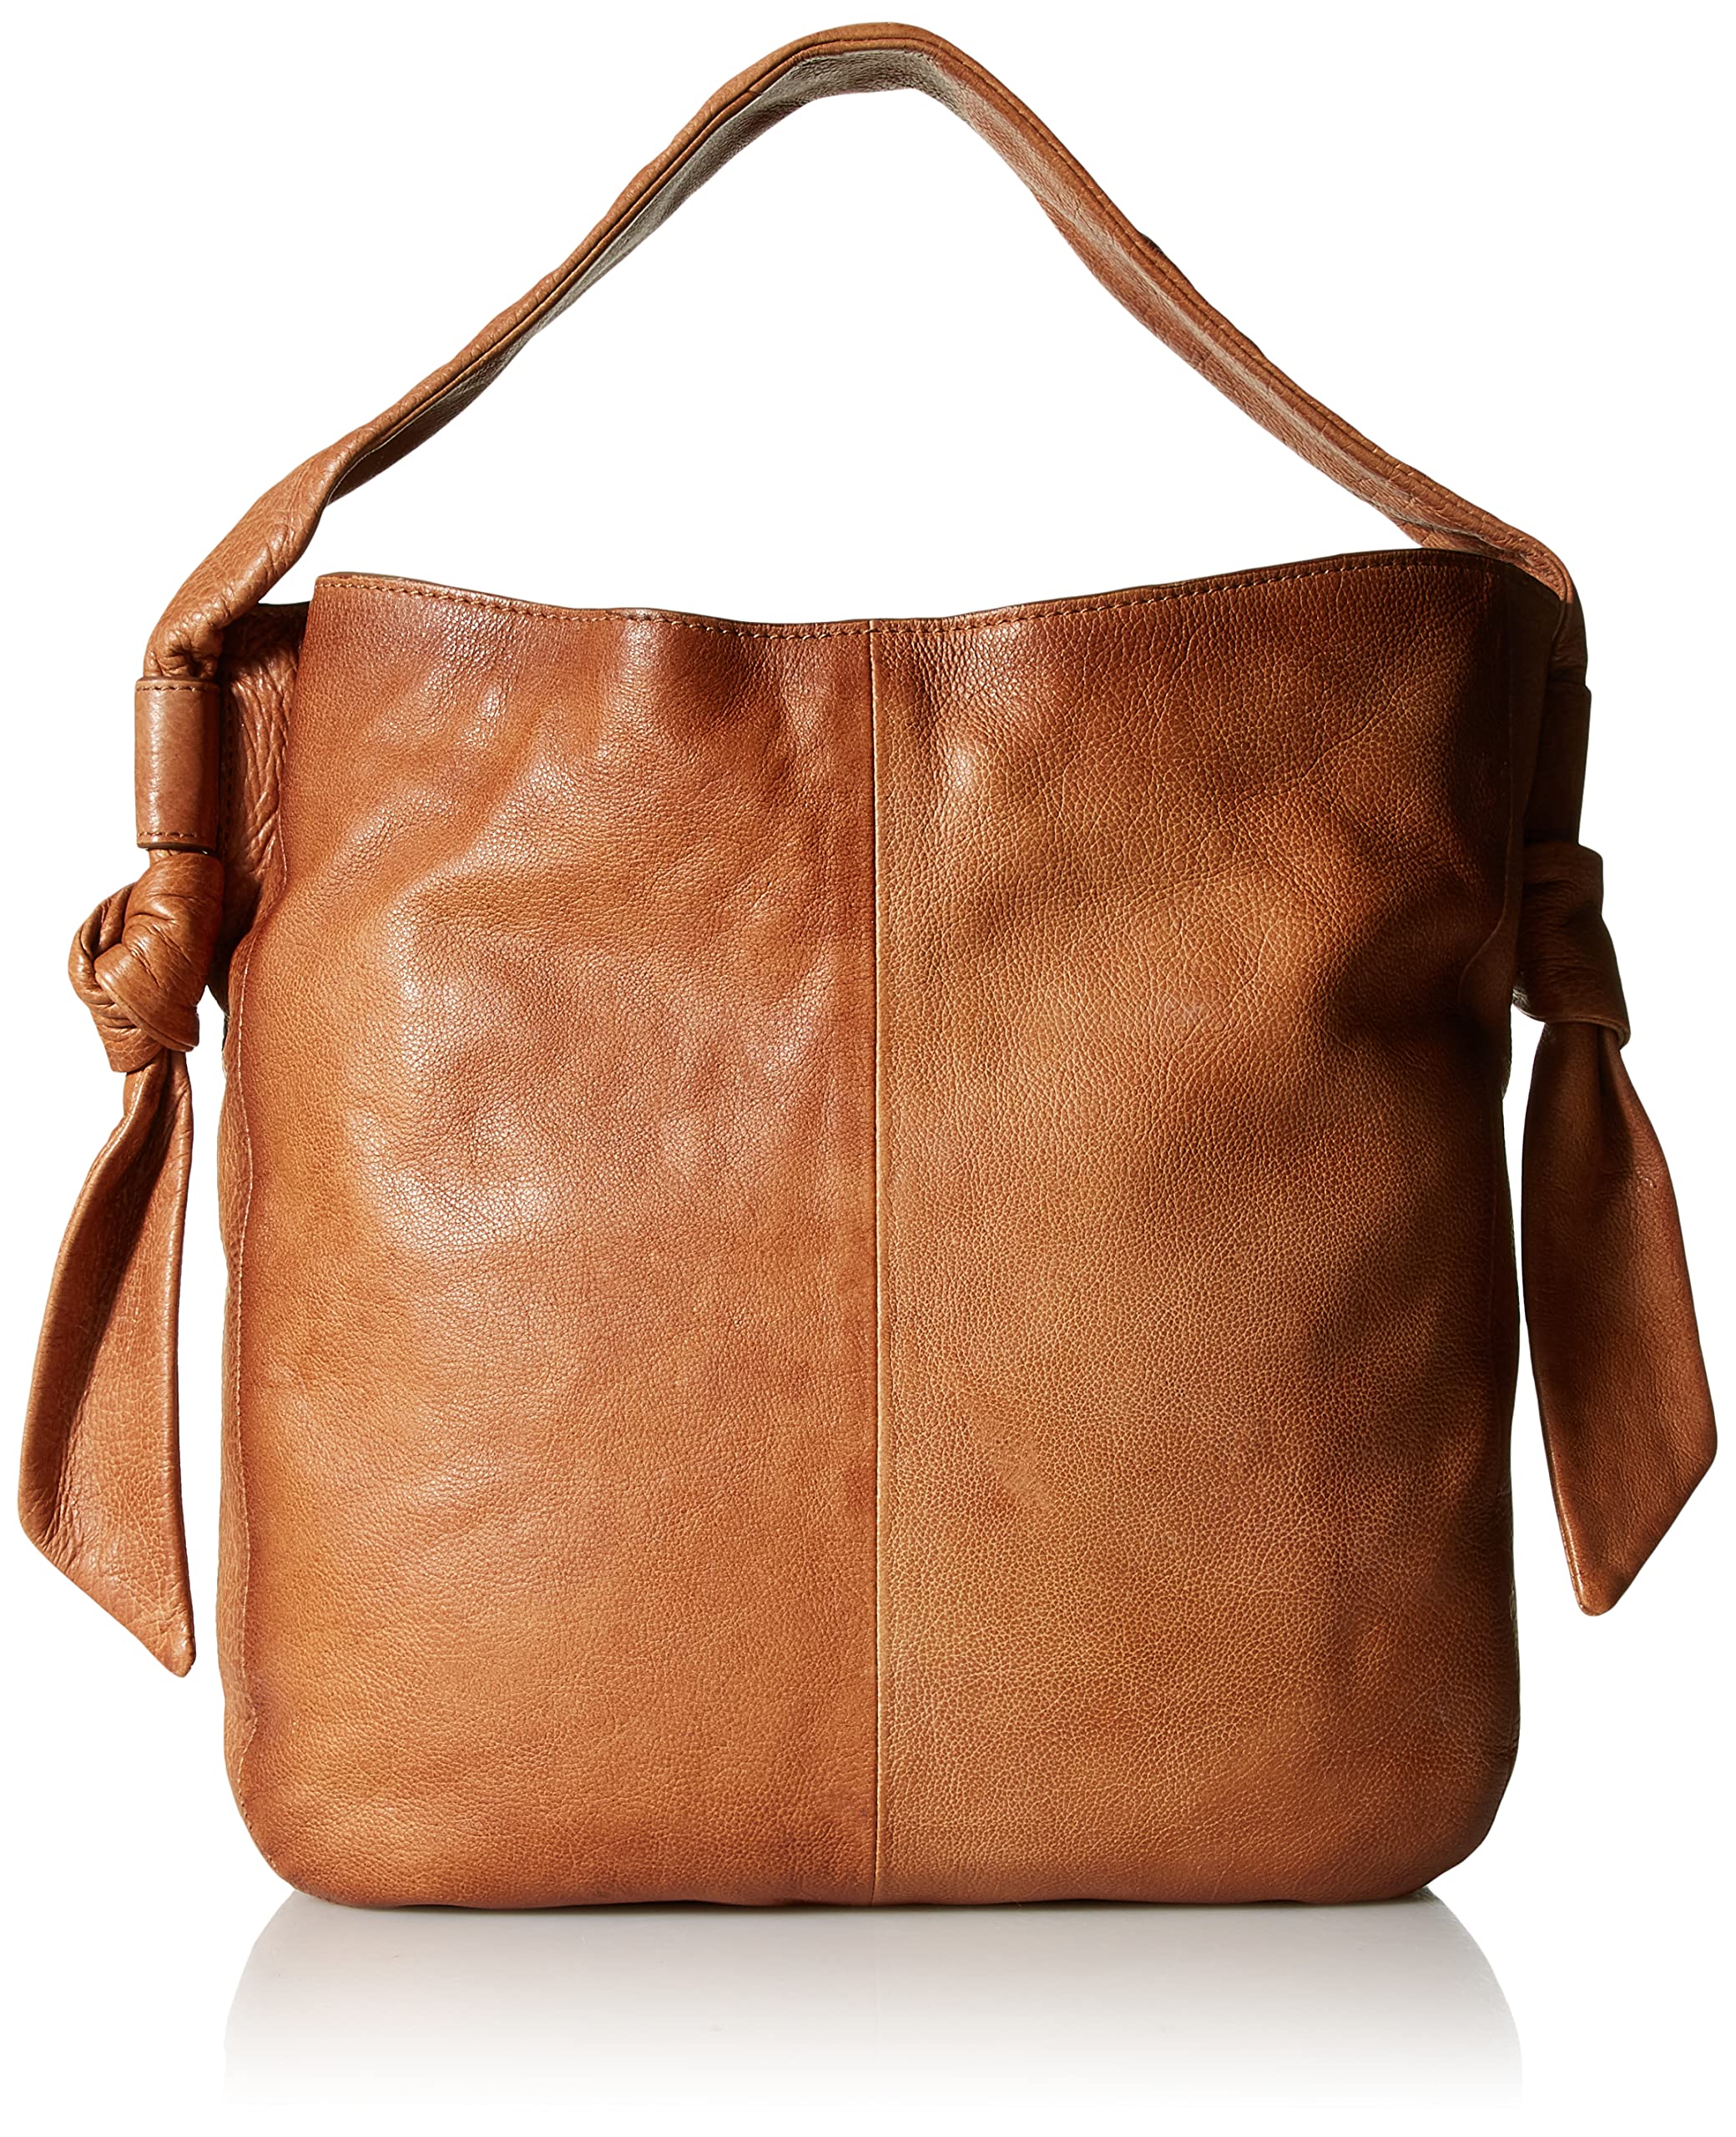 Frye Nora Knotted Hobo